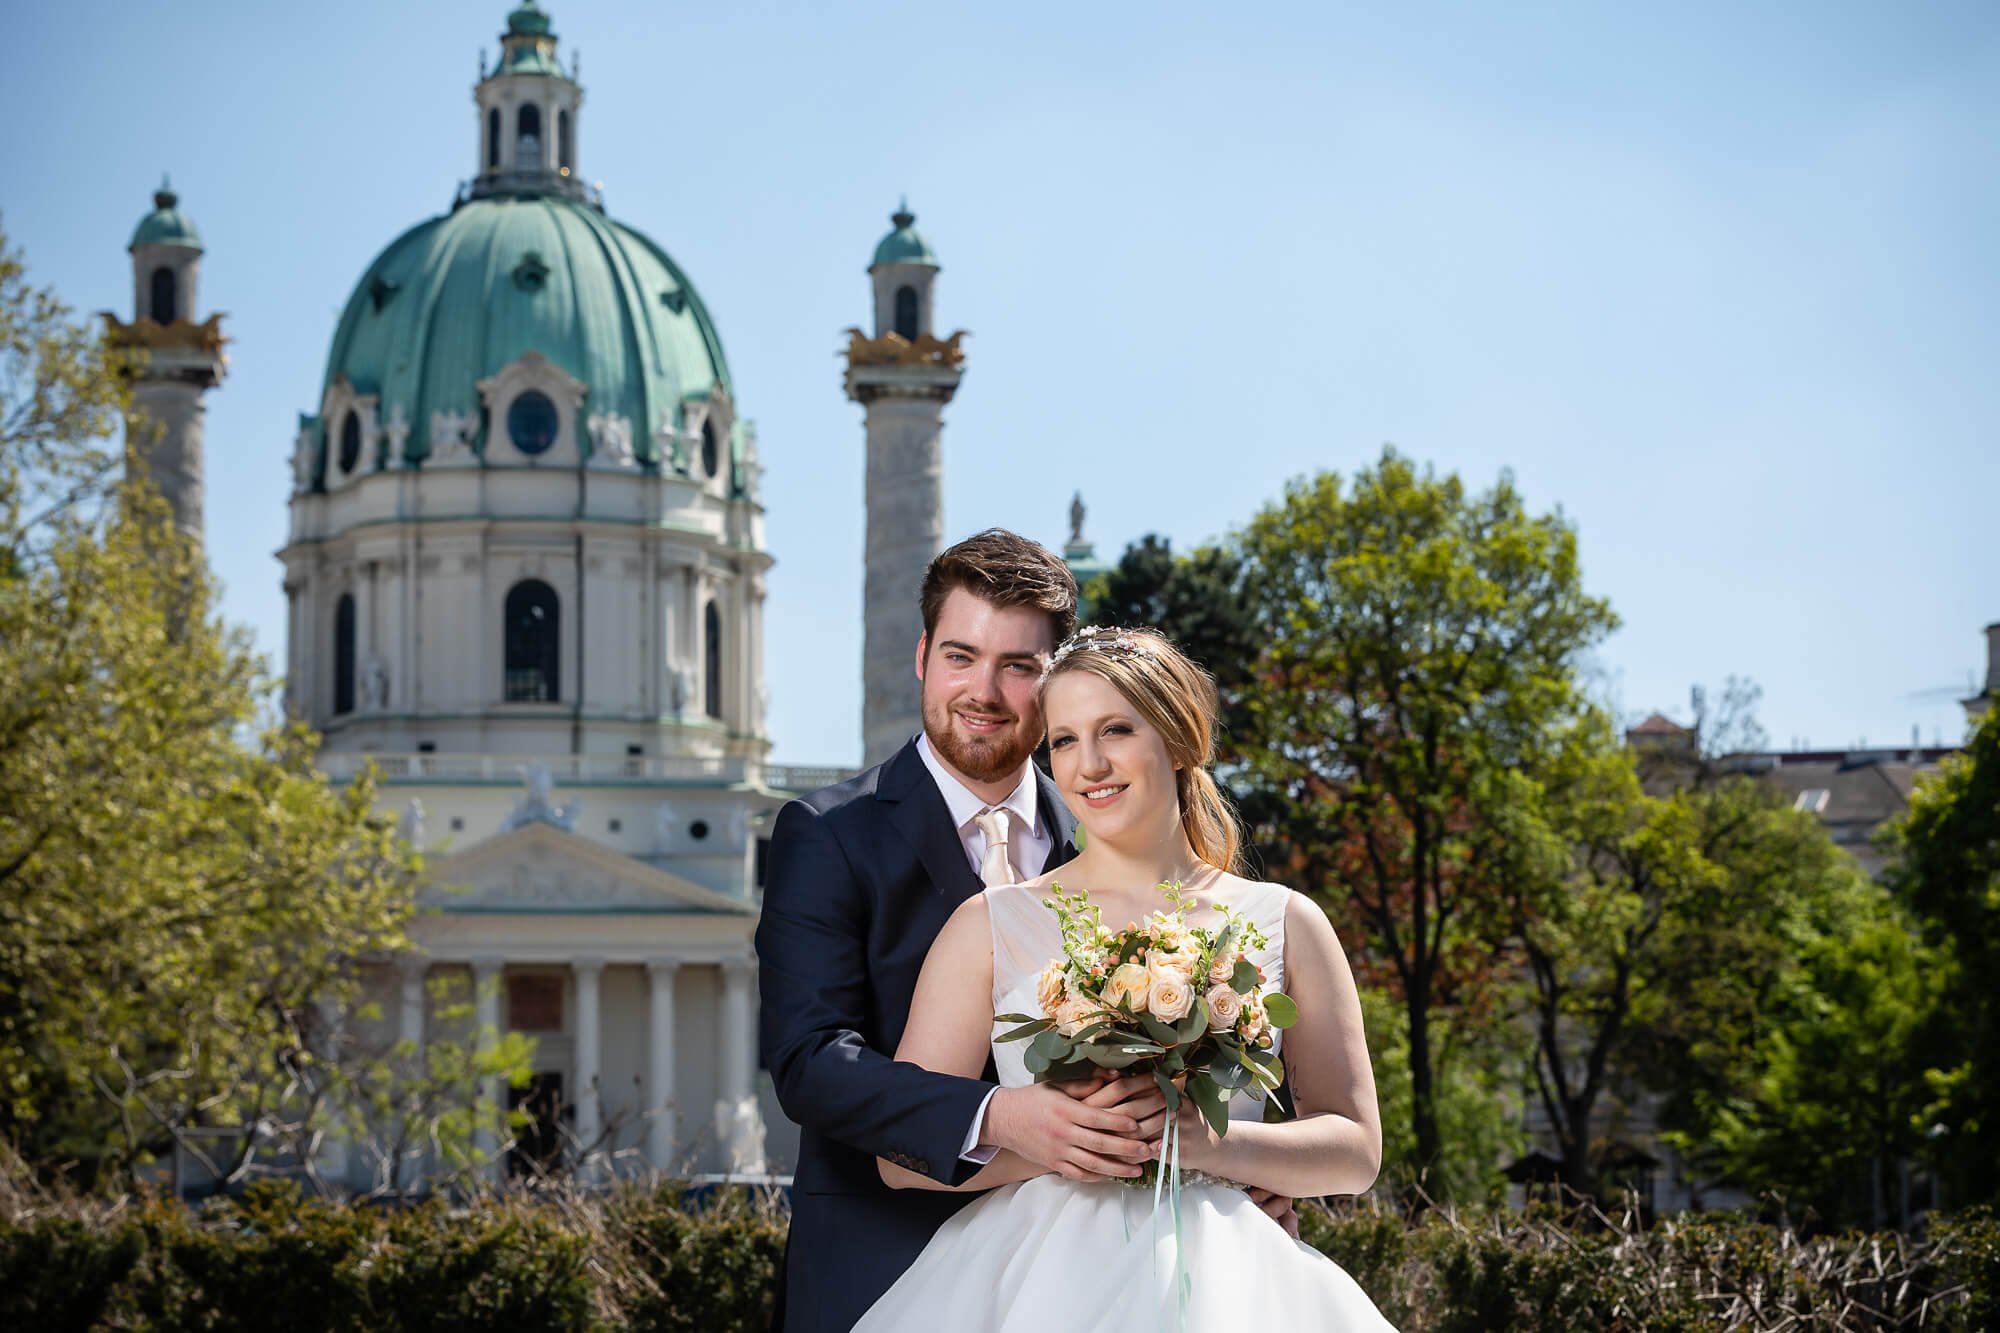 Wedding couple in love photographed in front of St. Charles Church in Vienna.